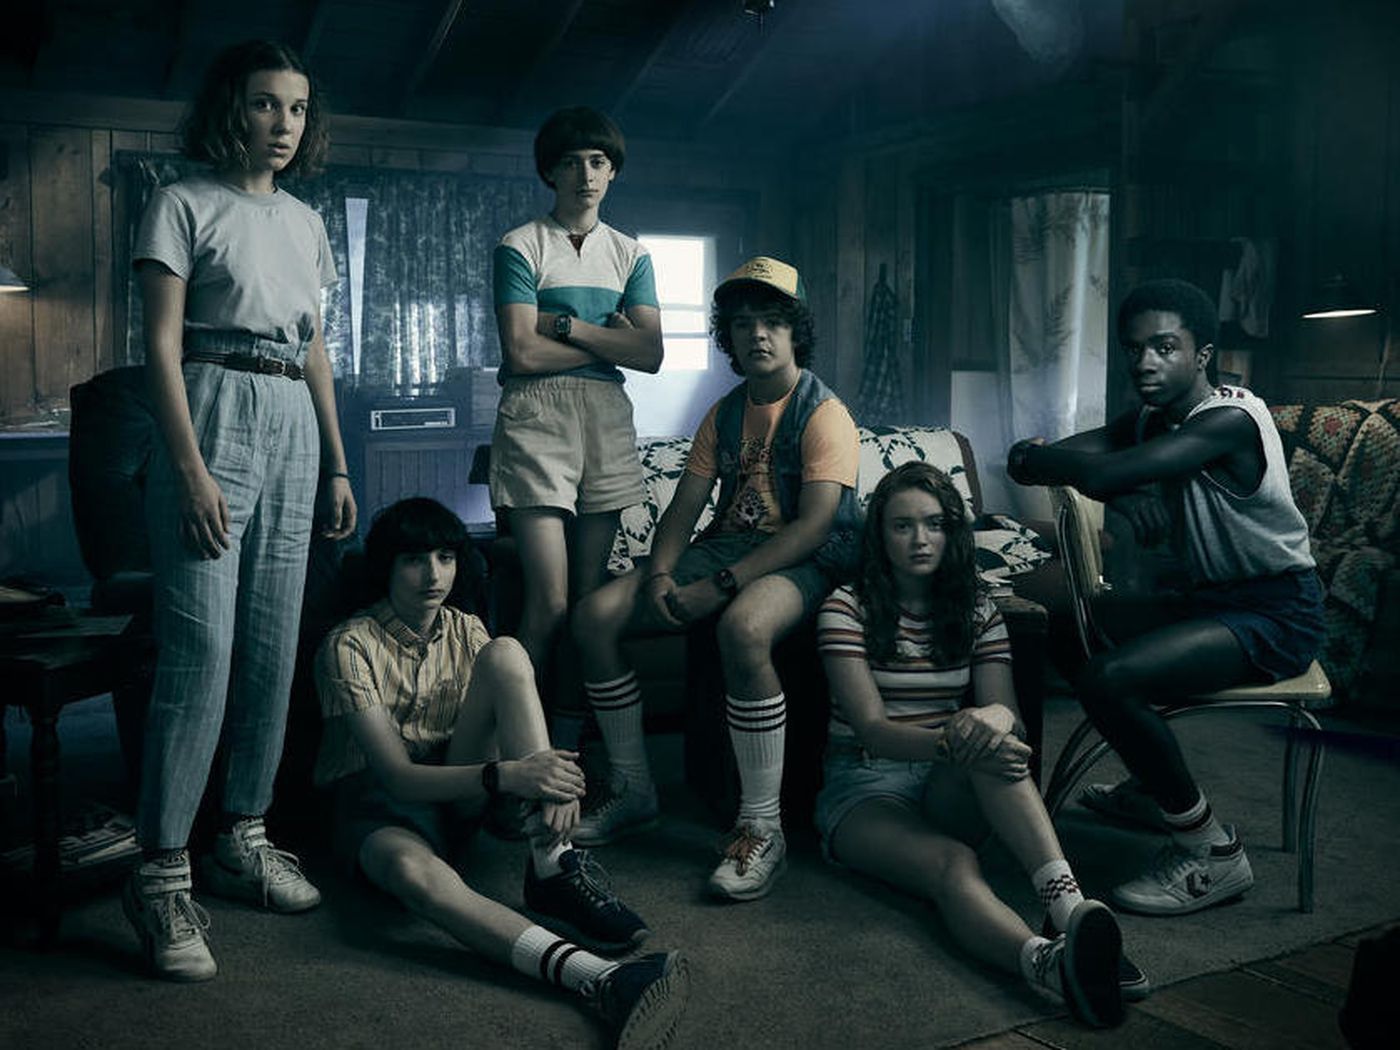 Stranger Things season 3 is here, and the Fourth of July was the perfect choice